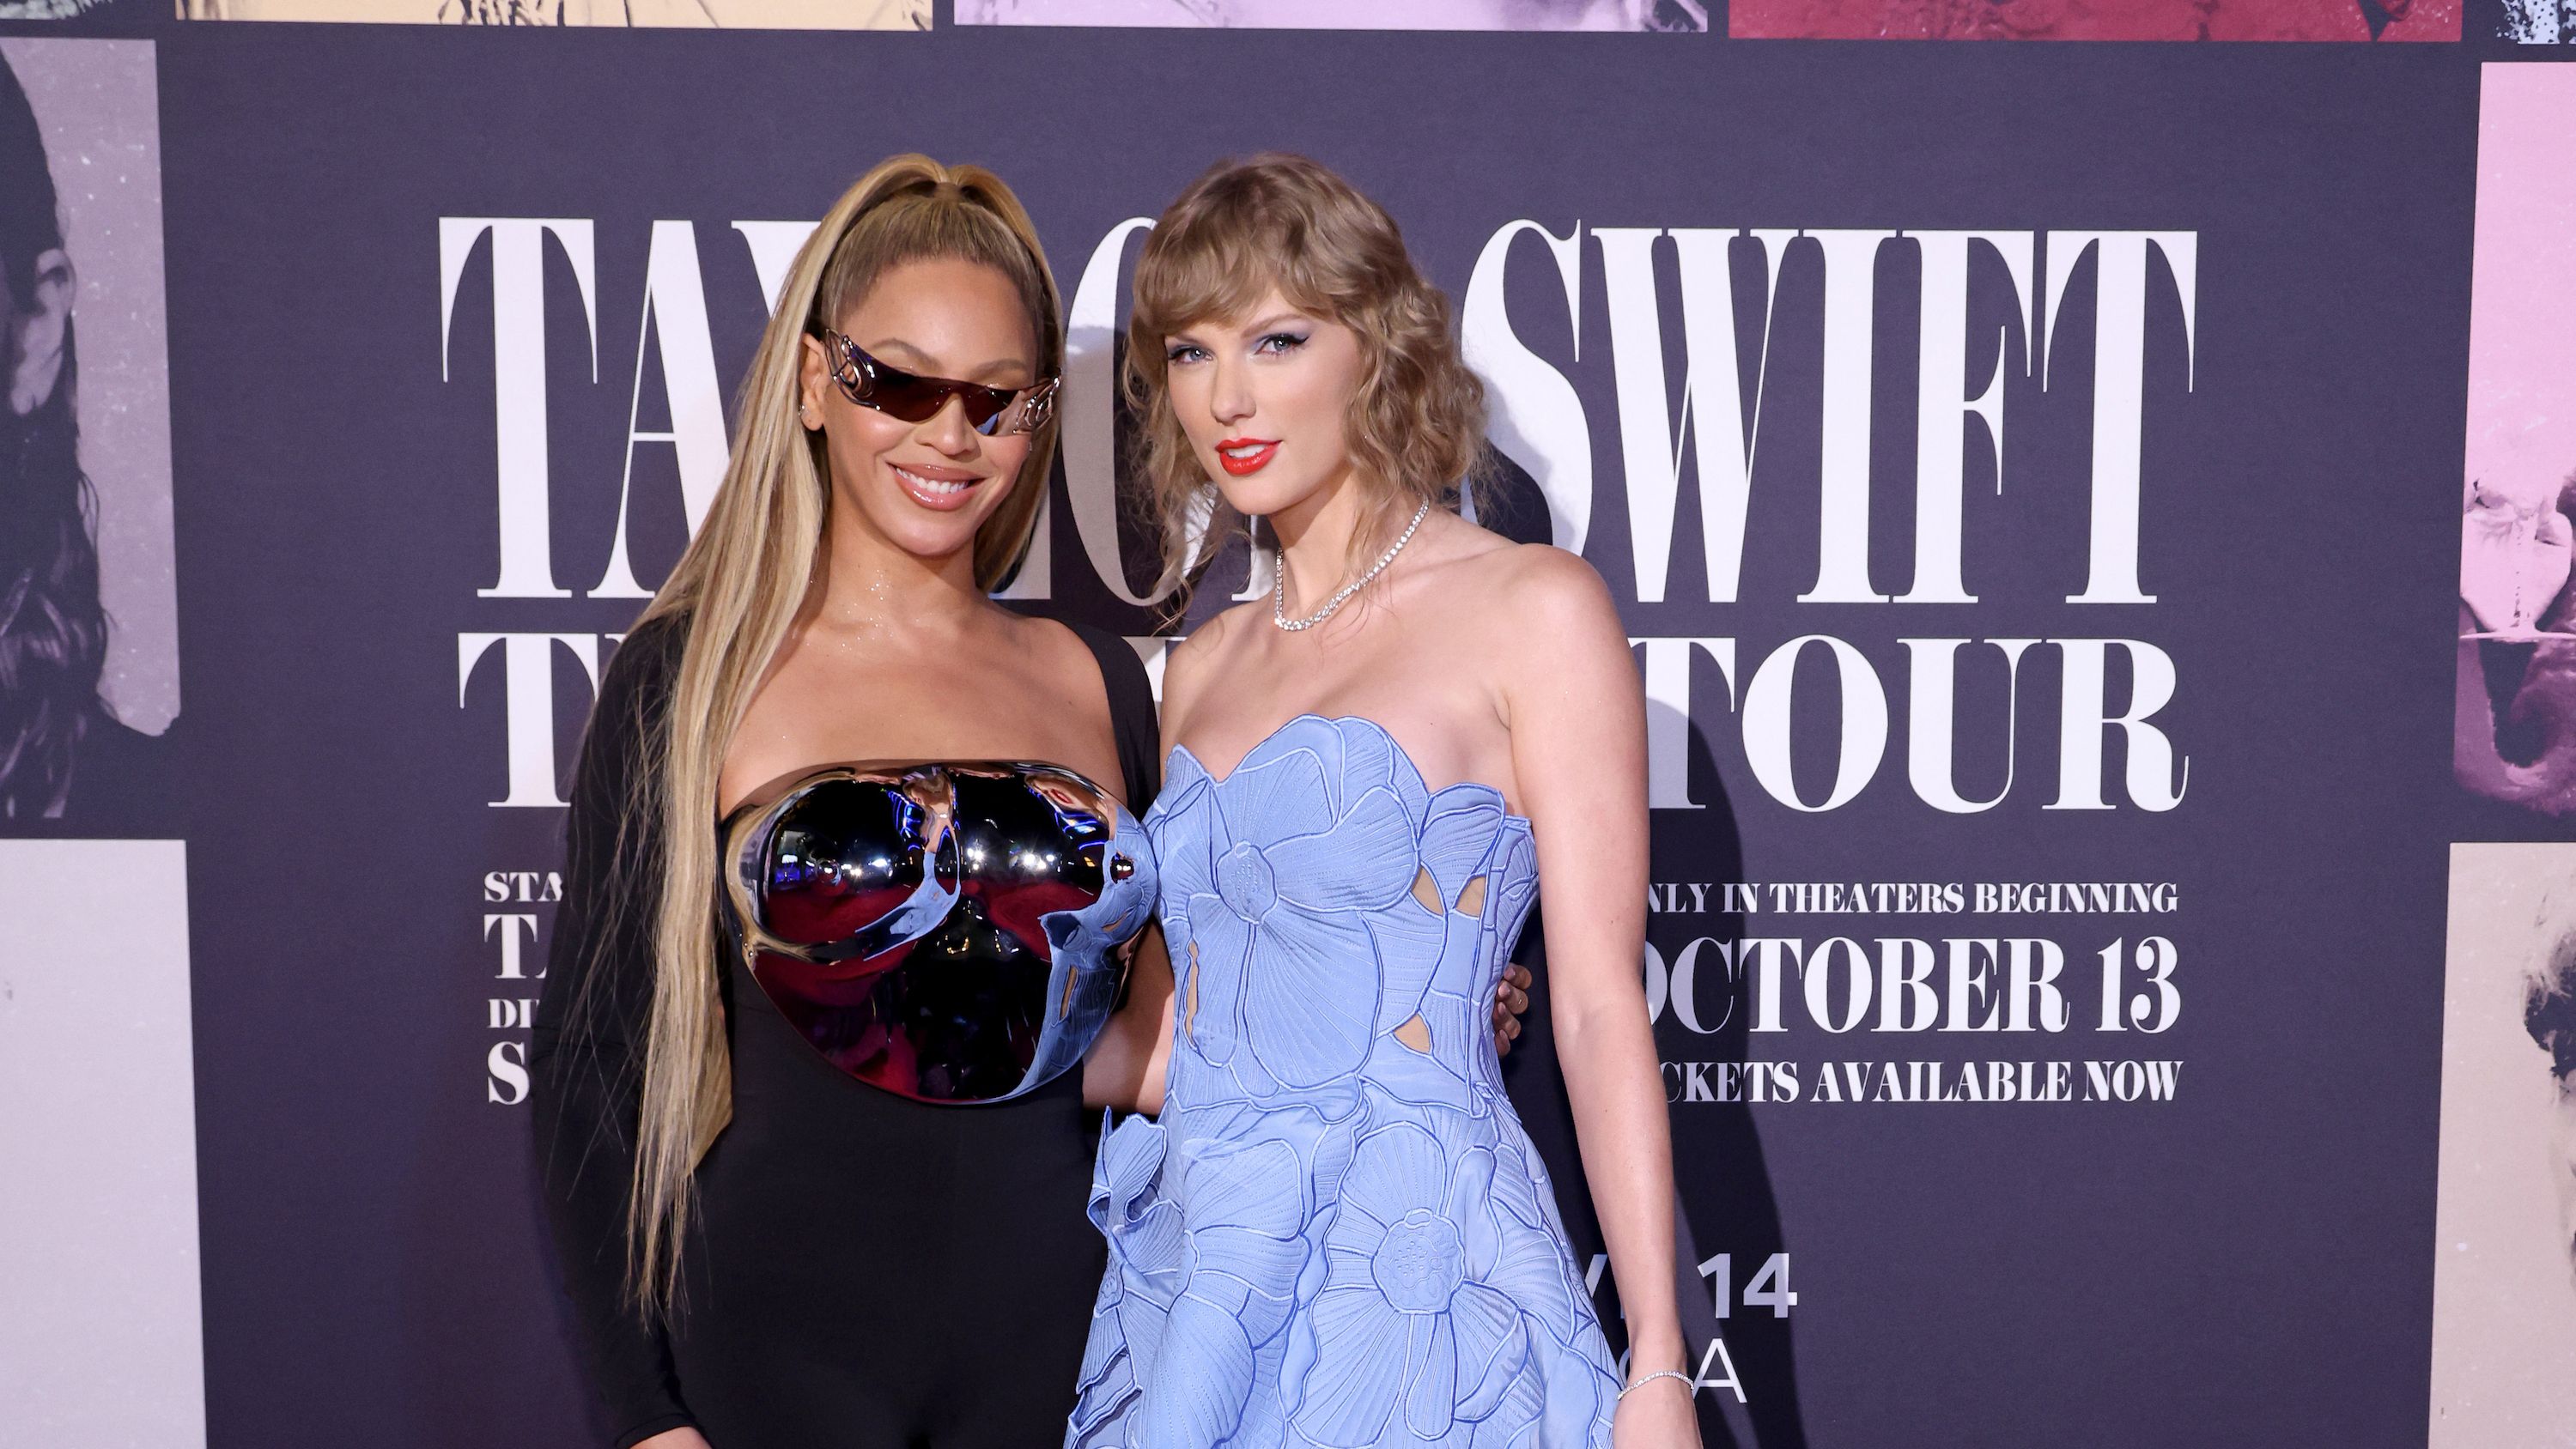 Taylor Swift 'Eras Tour' movie premiere: Photos from the red carpet